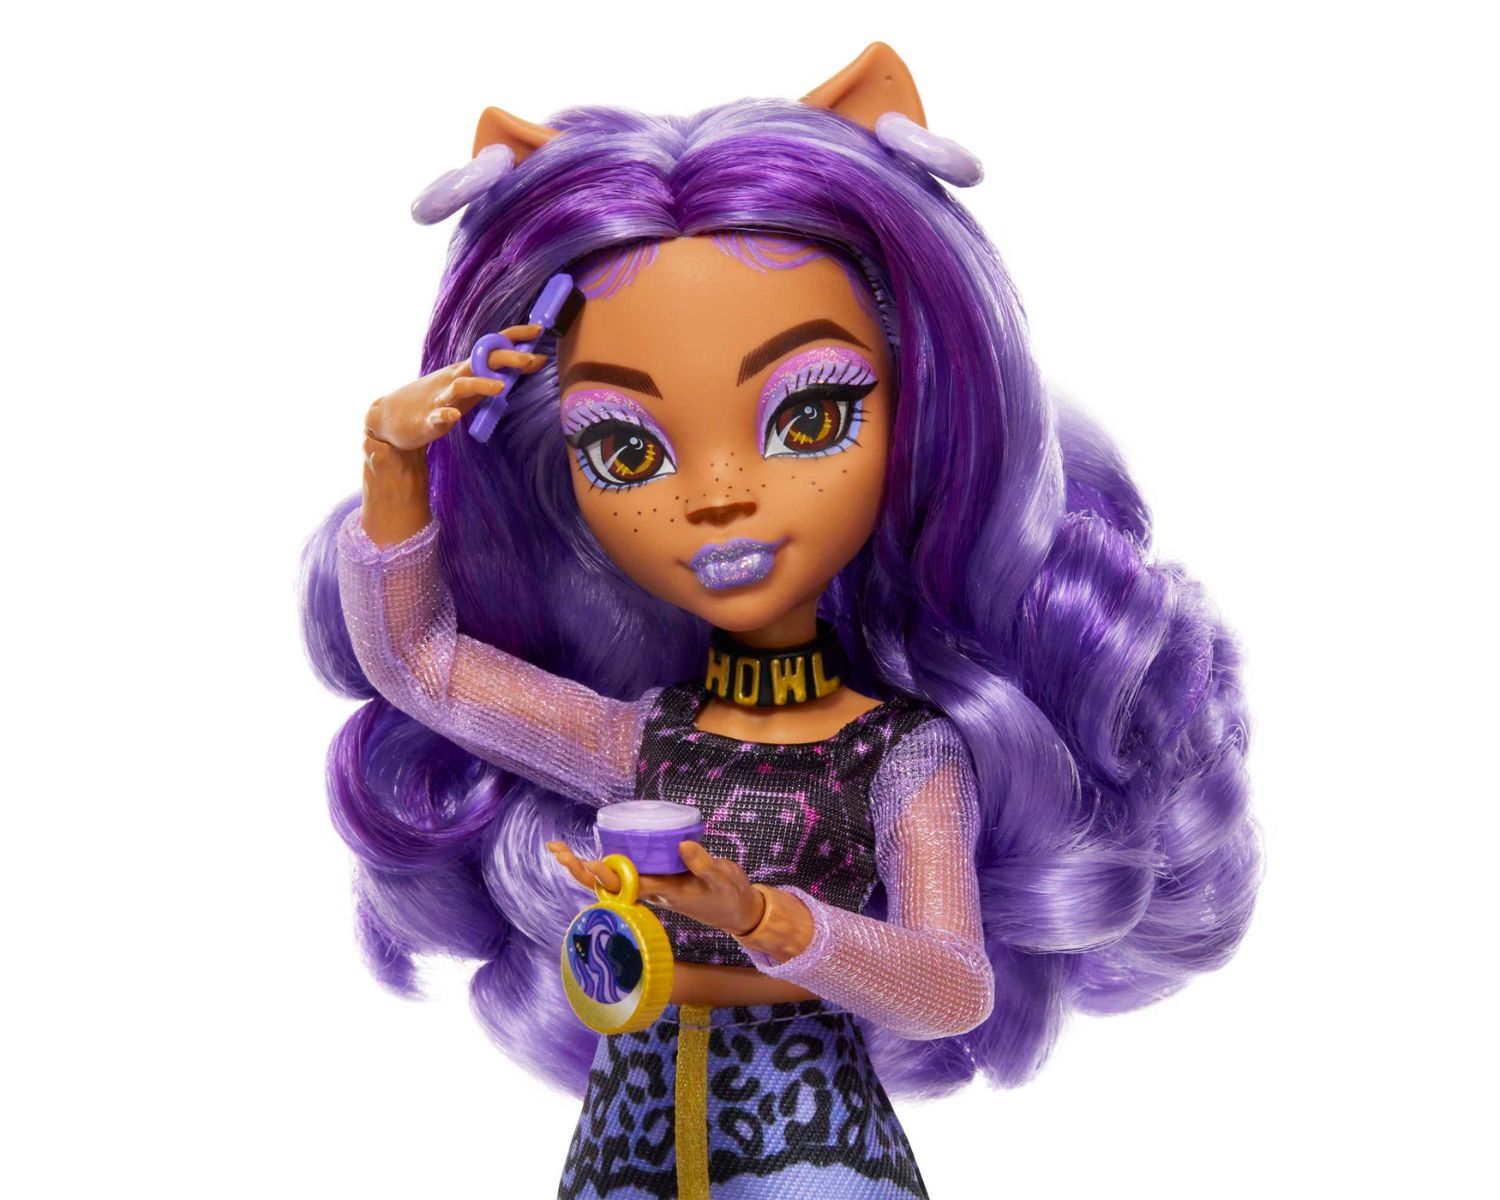 24 Facts About Clawdeen Wolf (Monster High) 